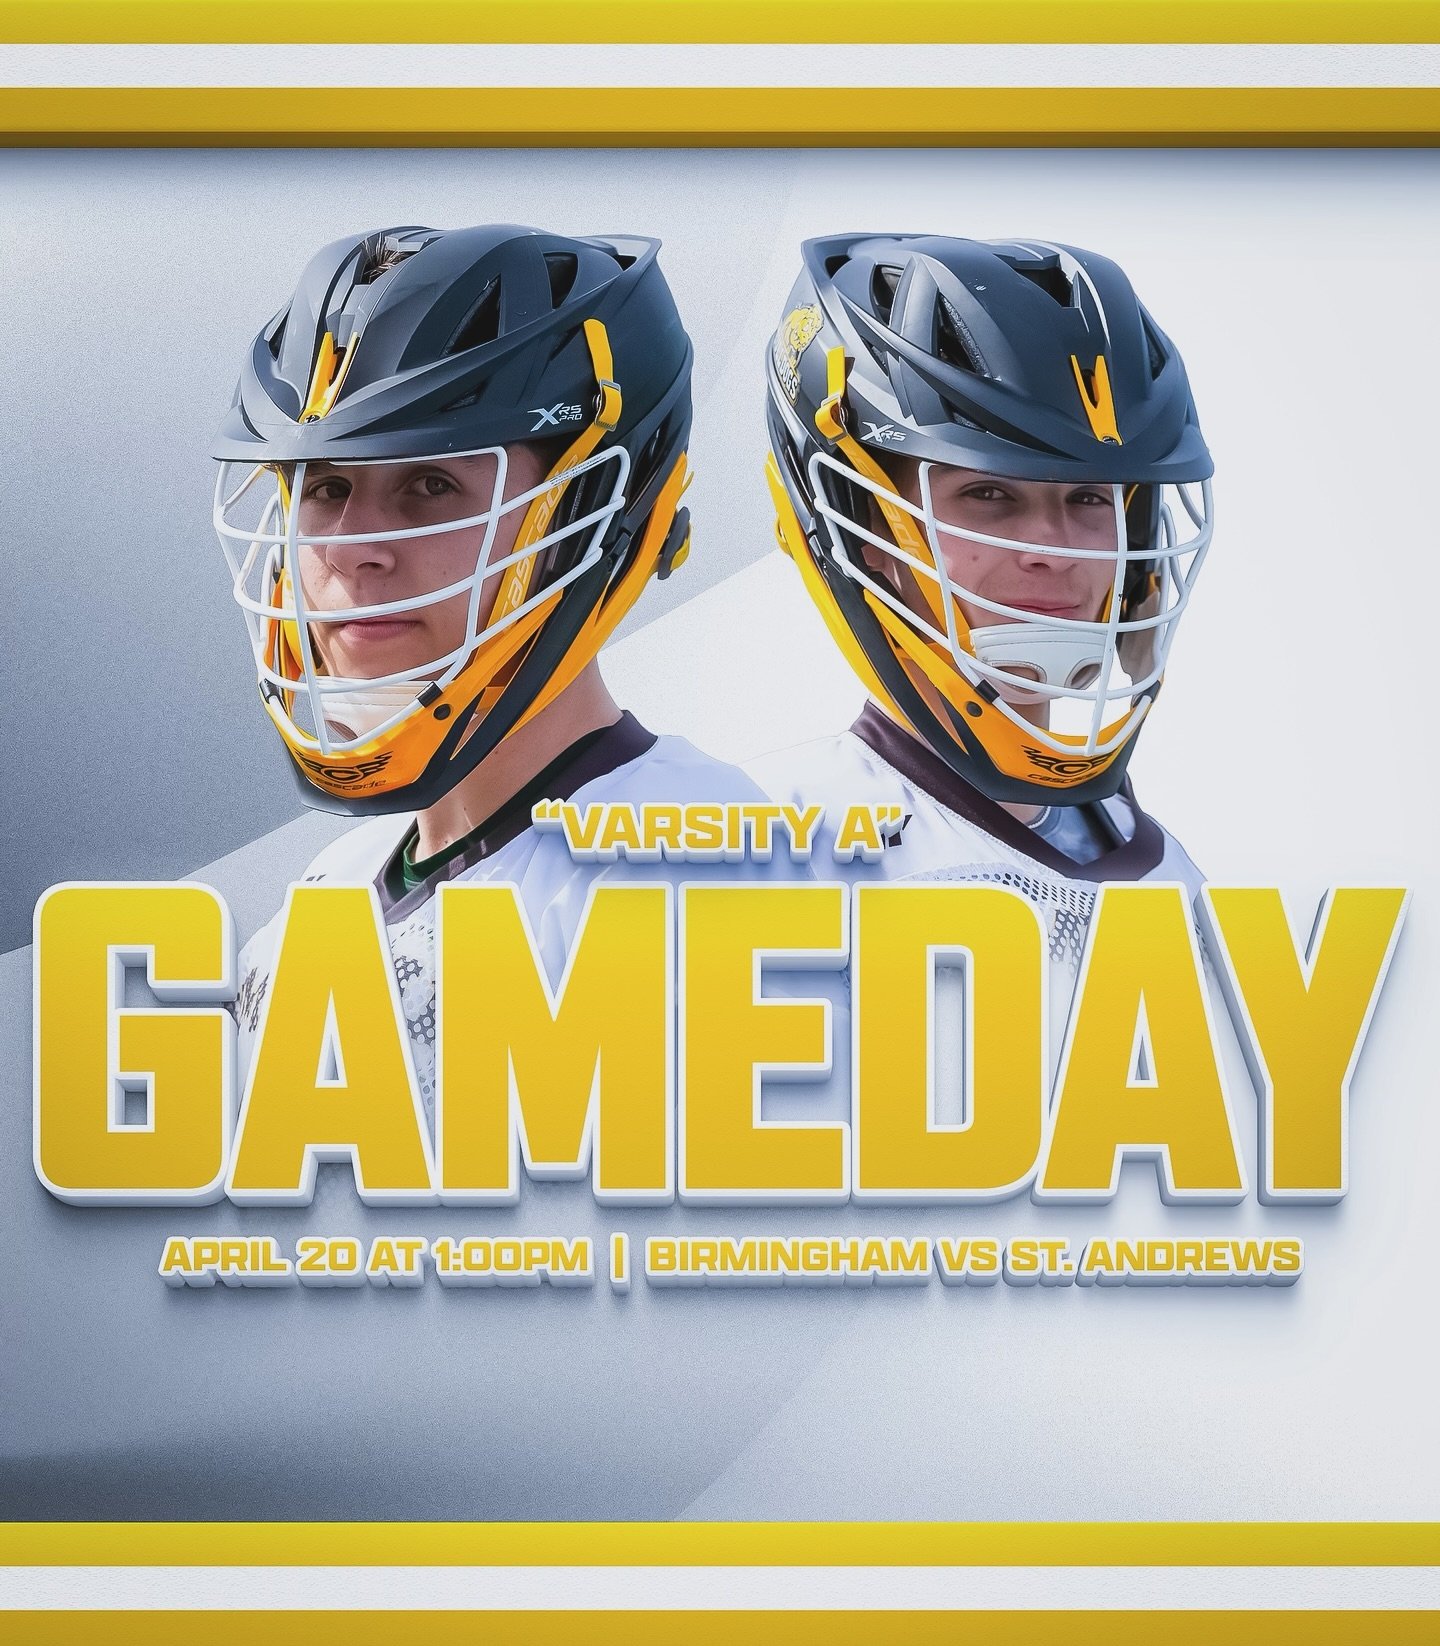 It&rsquo;s Gameday!!! The Varsity A Dawgs take on St. Andrew&rsquo;s at 1pm. #skodawgs
-
-
-
@bfeldy.psd